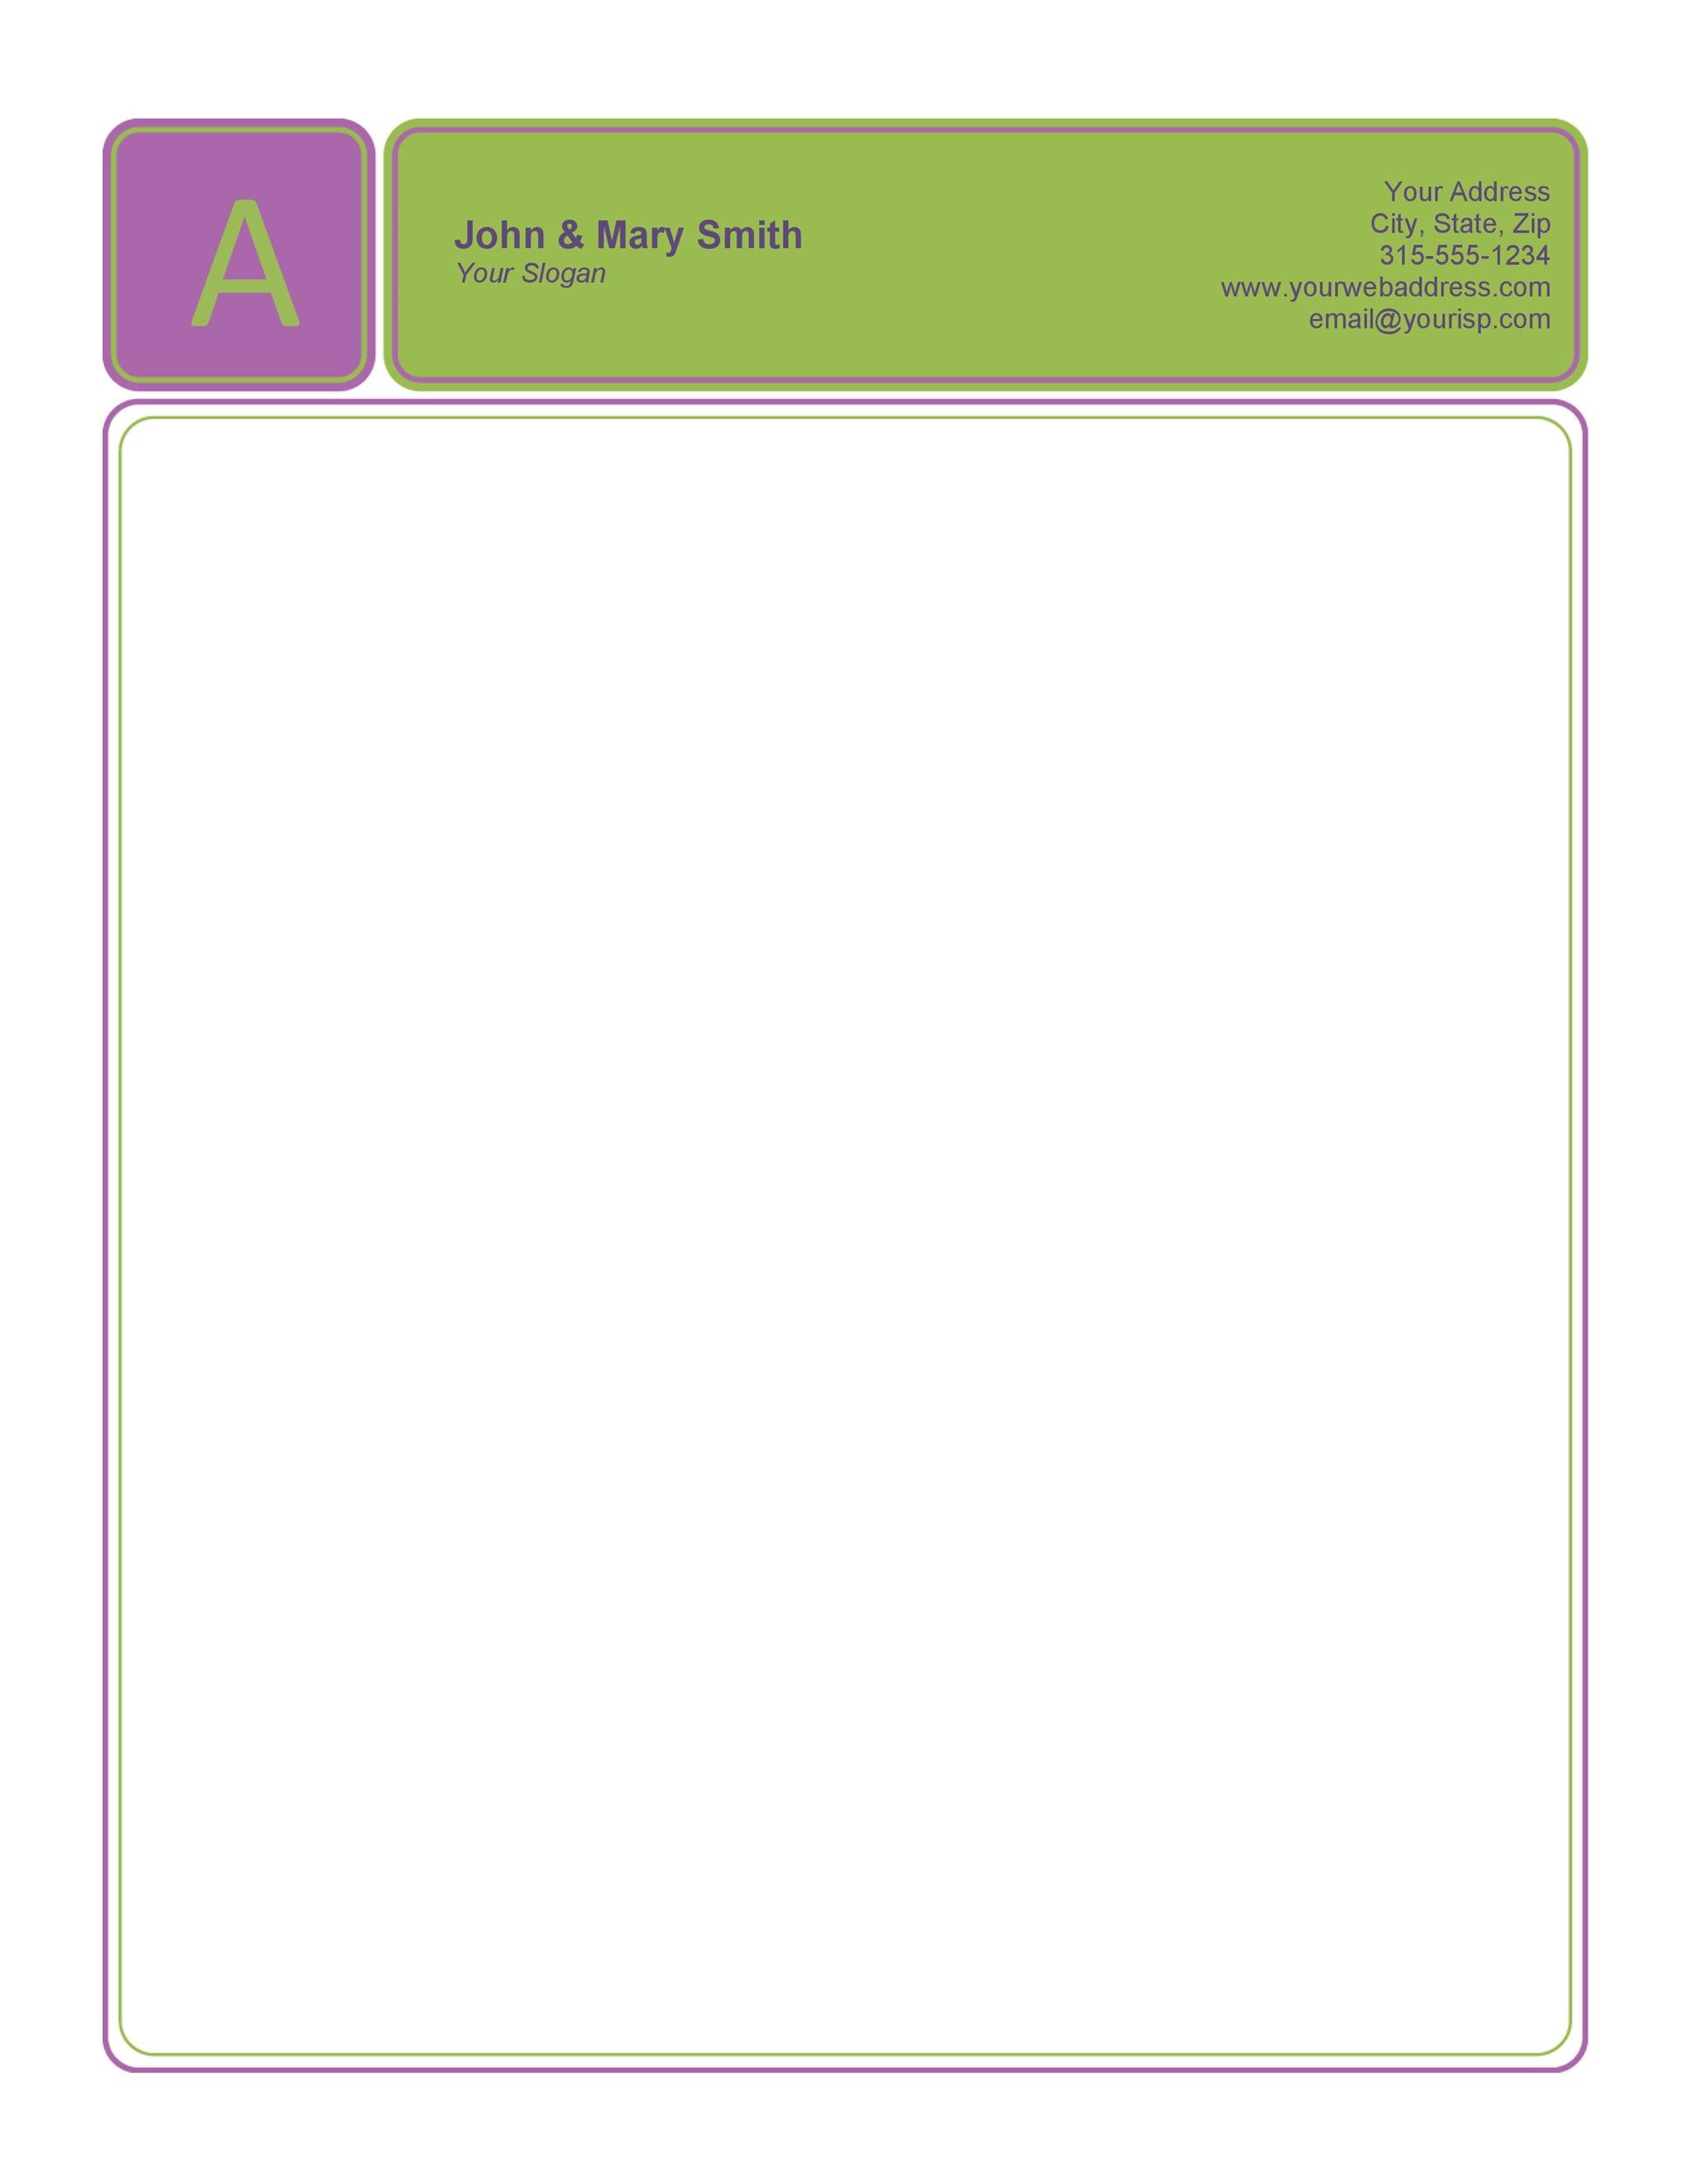 45  Free Letterhead Templates Examples (Company Business Personal)